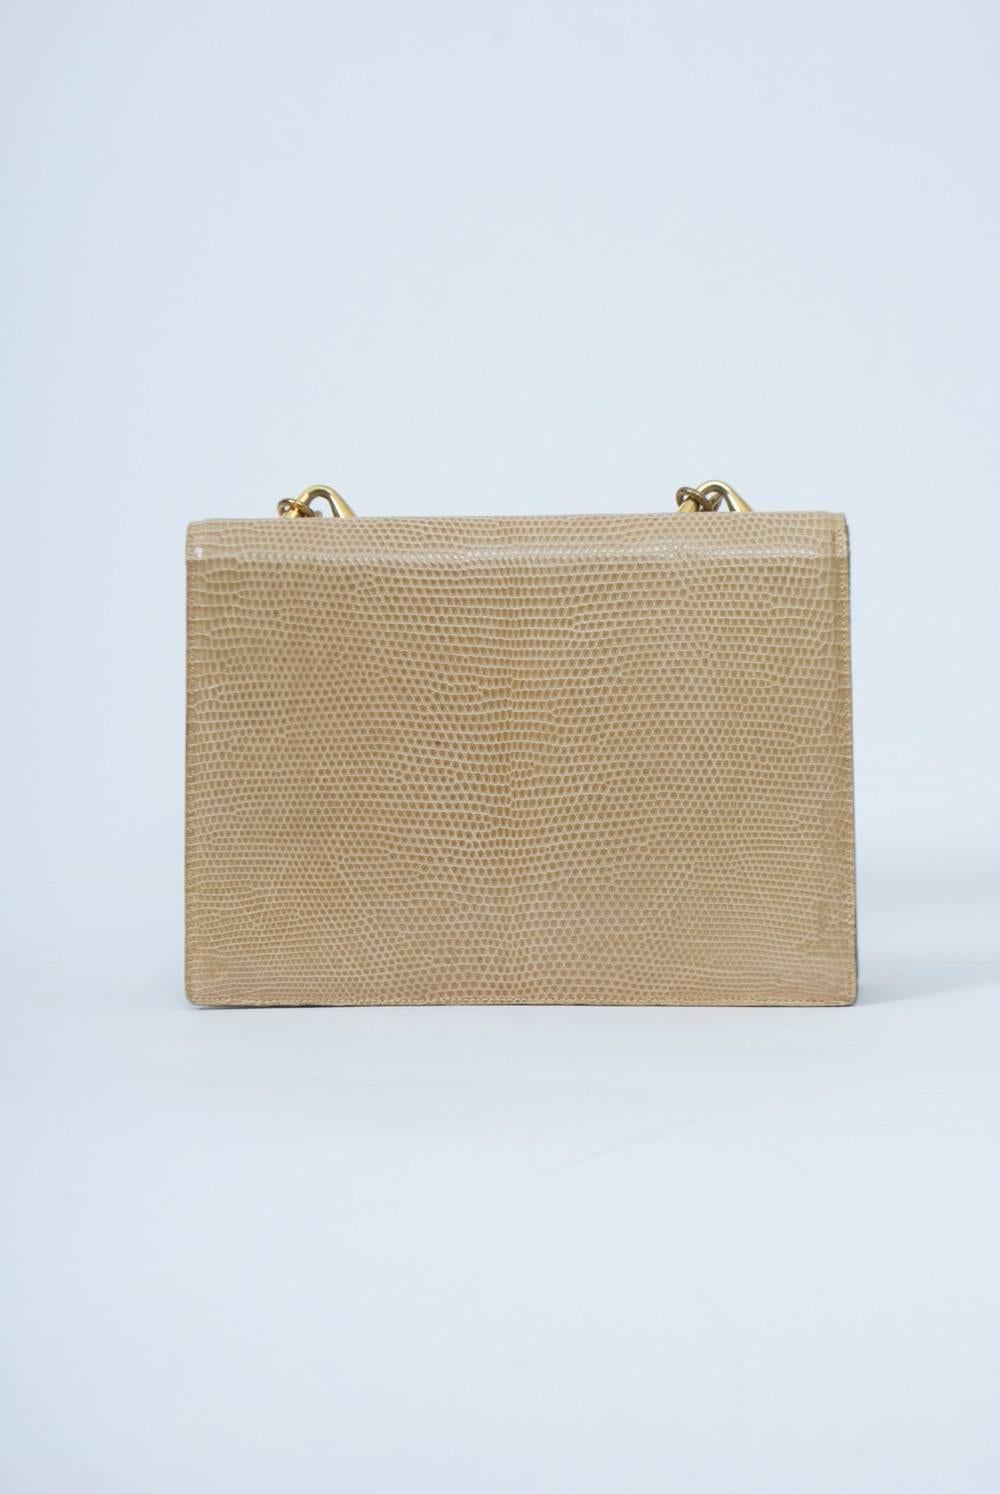 Beige lizard 1960s shoulder bag by Finesse features a heavy gold chain and  structured body with envelope flap and gold ring clasp. Accordion three-section interior with side compartments and separate change purse. Appears little used, with original